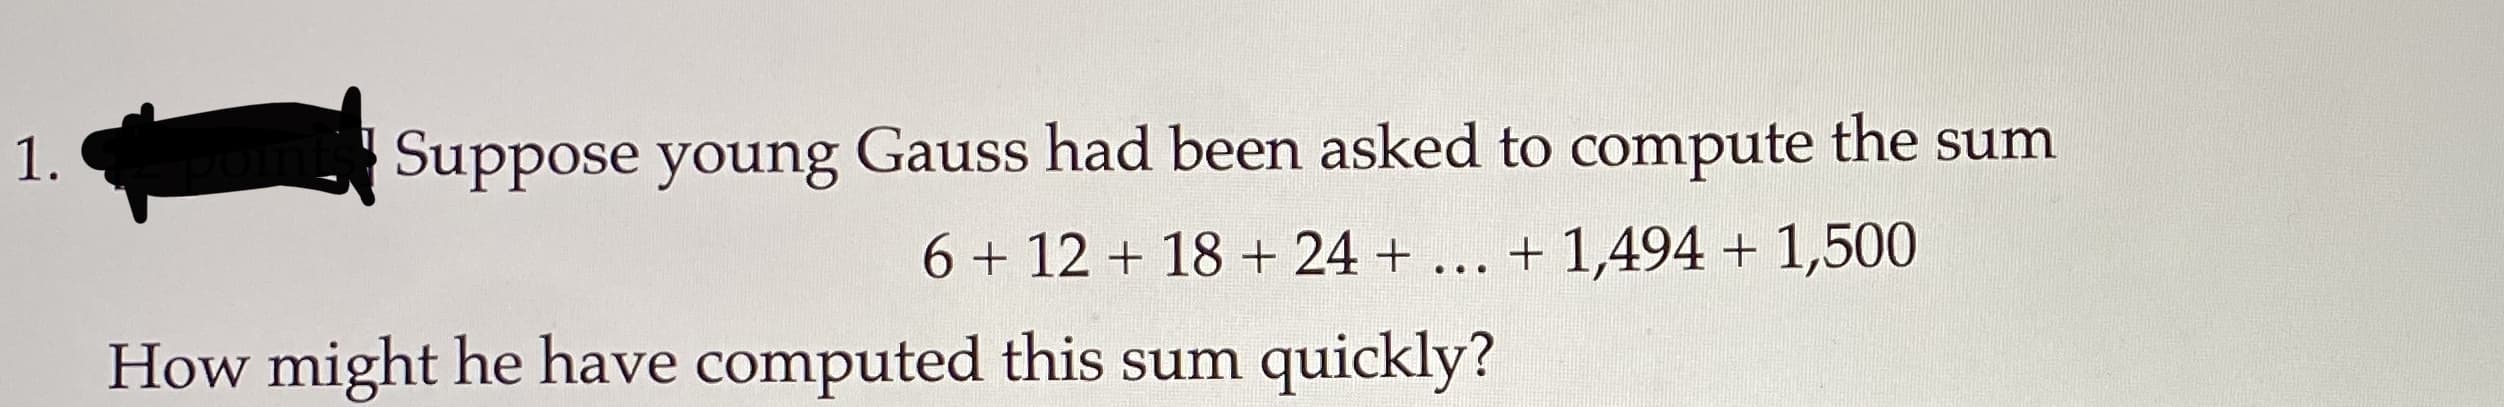 Suppose young Gauss had been asked to compute the sum
6 + 12 + 18 + 24 + ... + 1,494 + 1,500
1.
How might he have computed this sum quickly?
